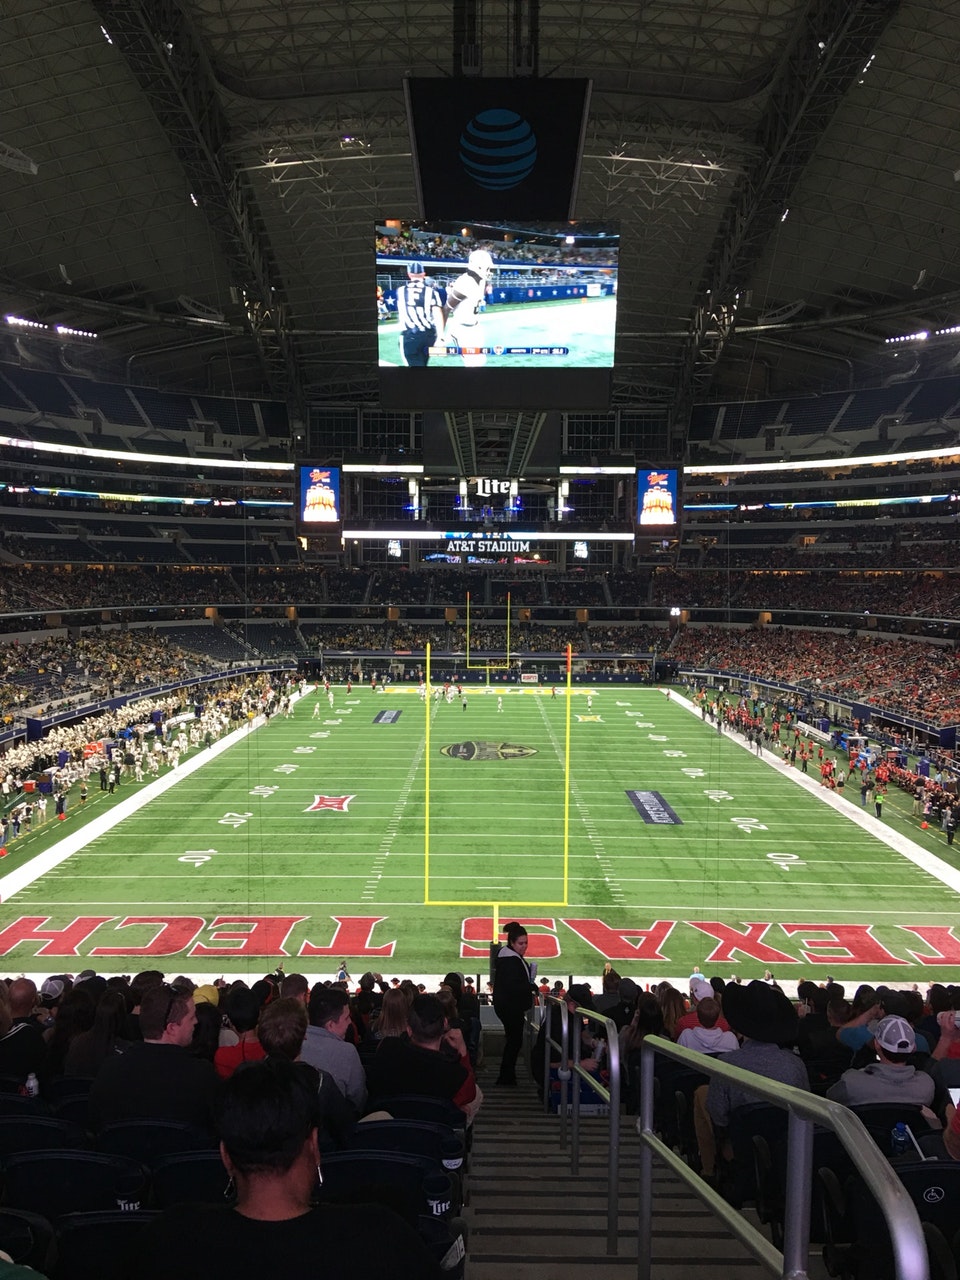 section 248, row 15 seat view  for football - at&t stadium (cowboys stadium)